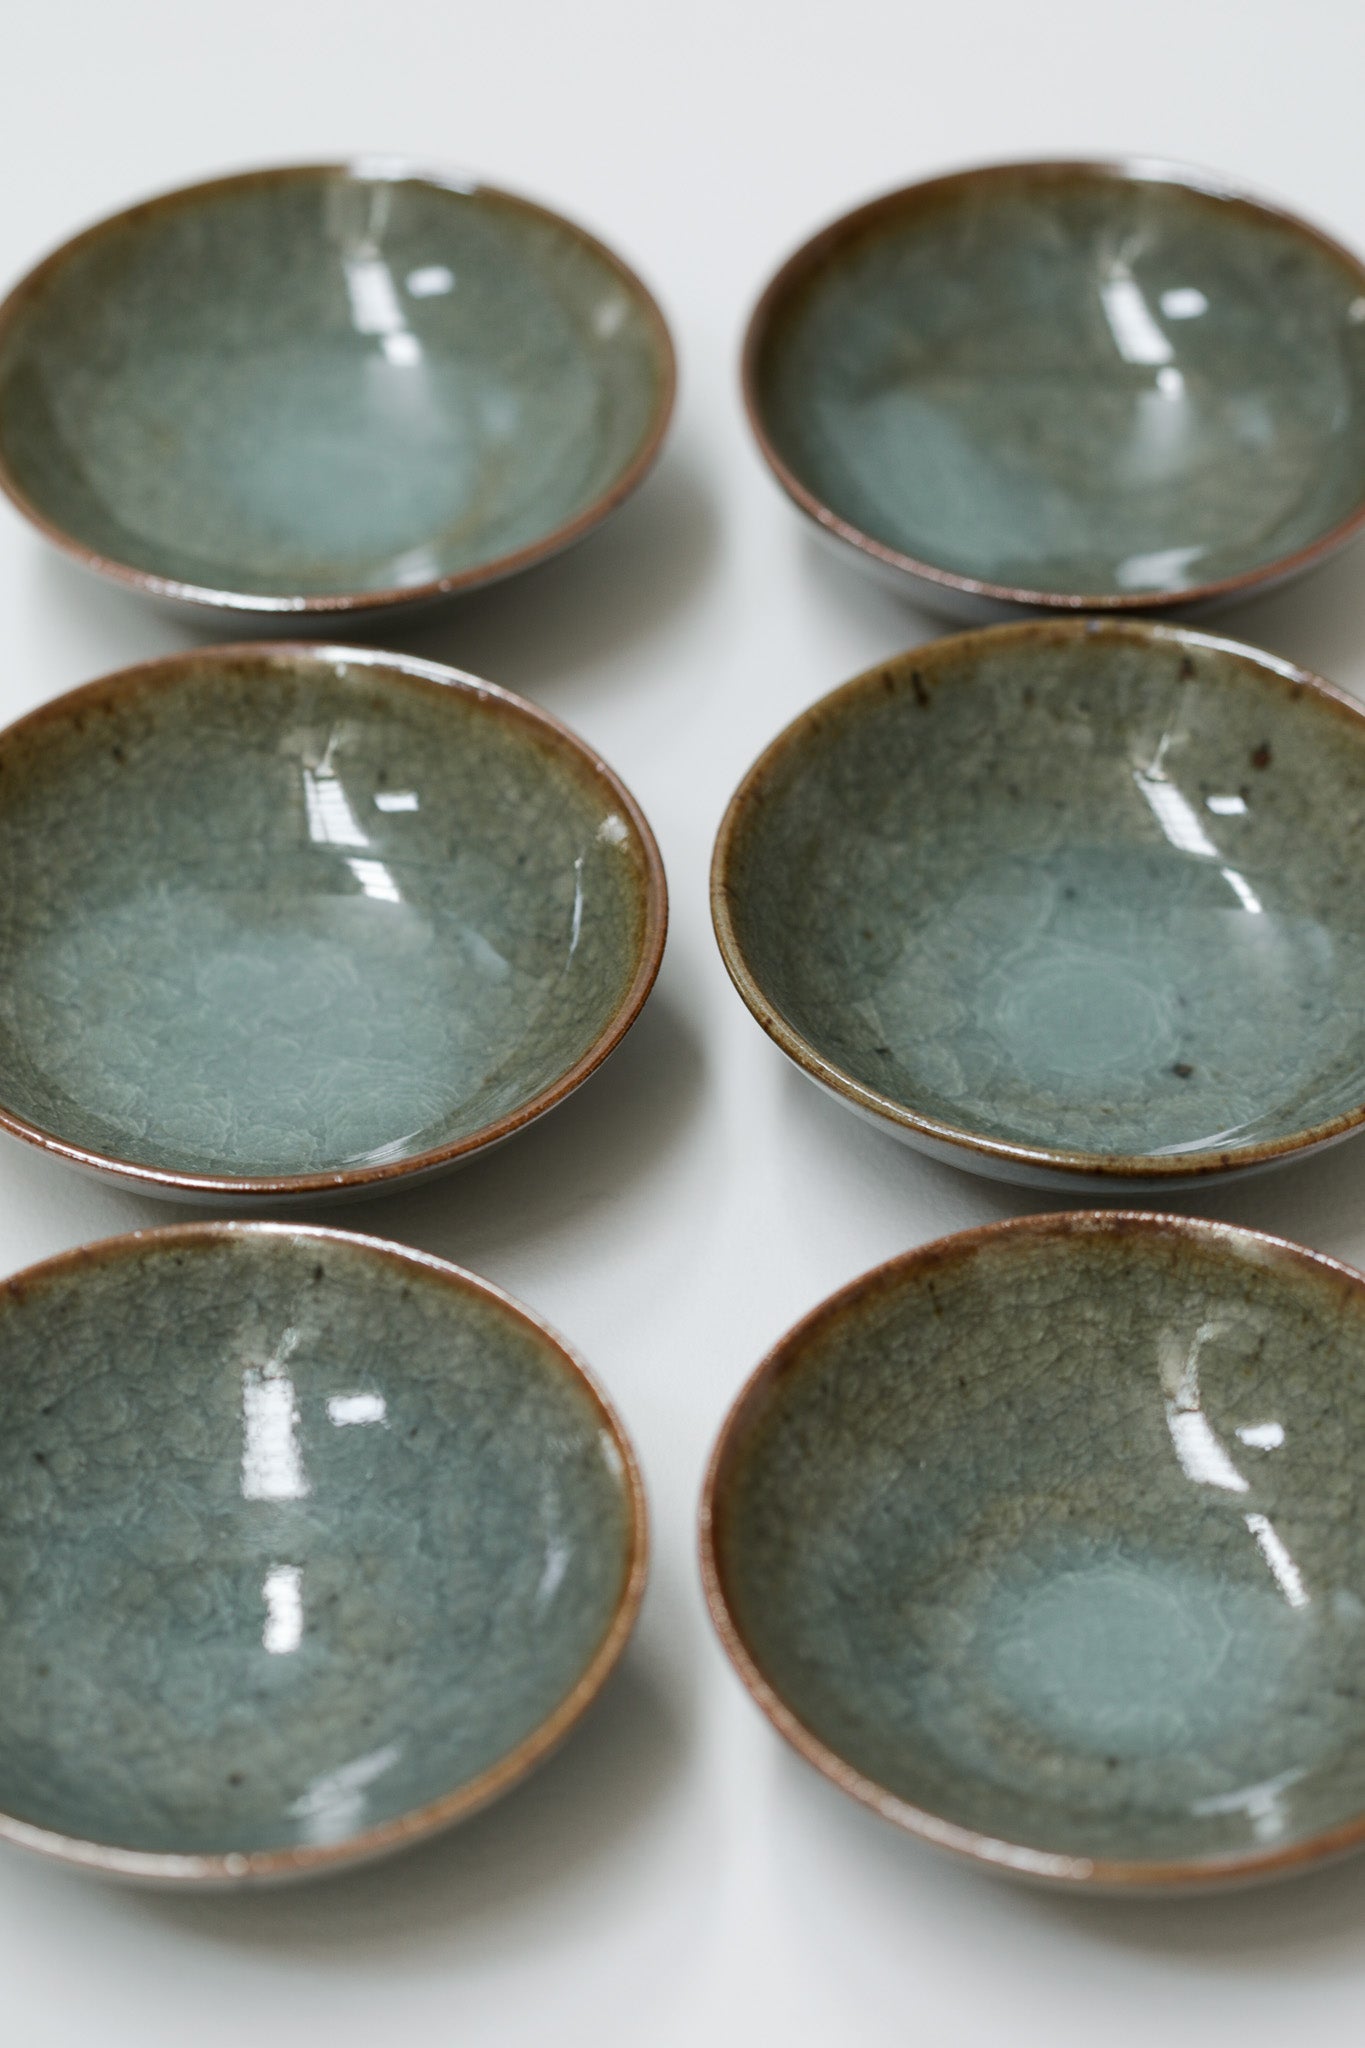 Florian Gadsby: Set of Small Bowls